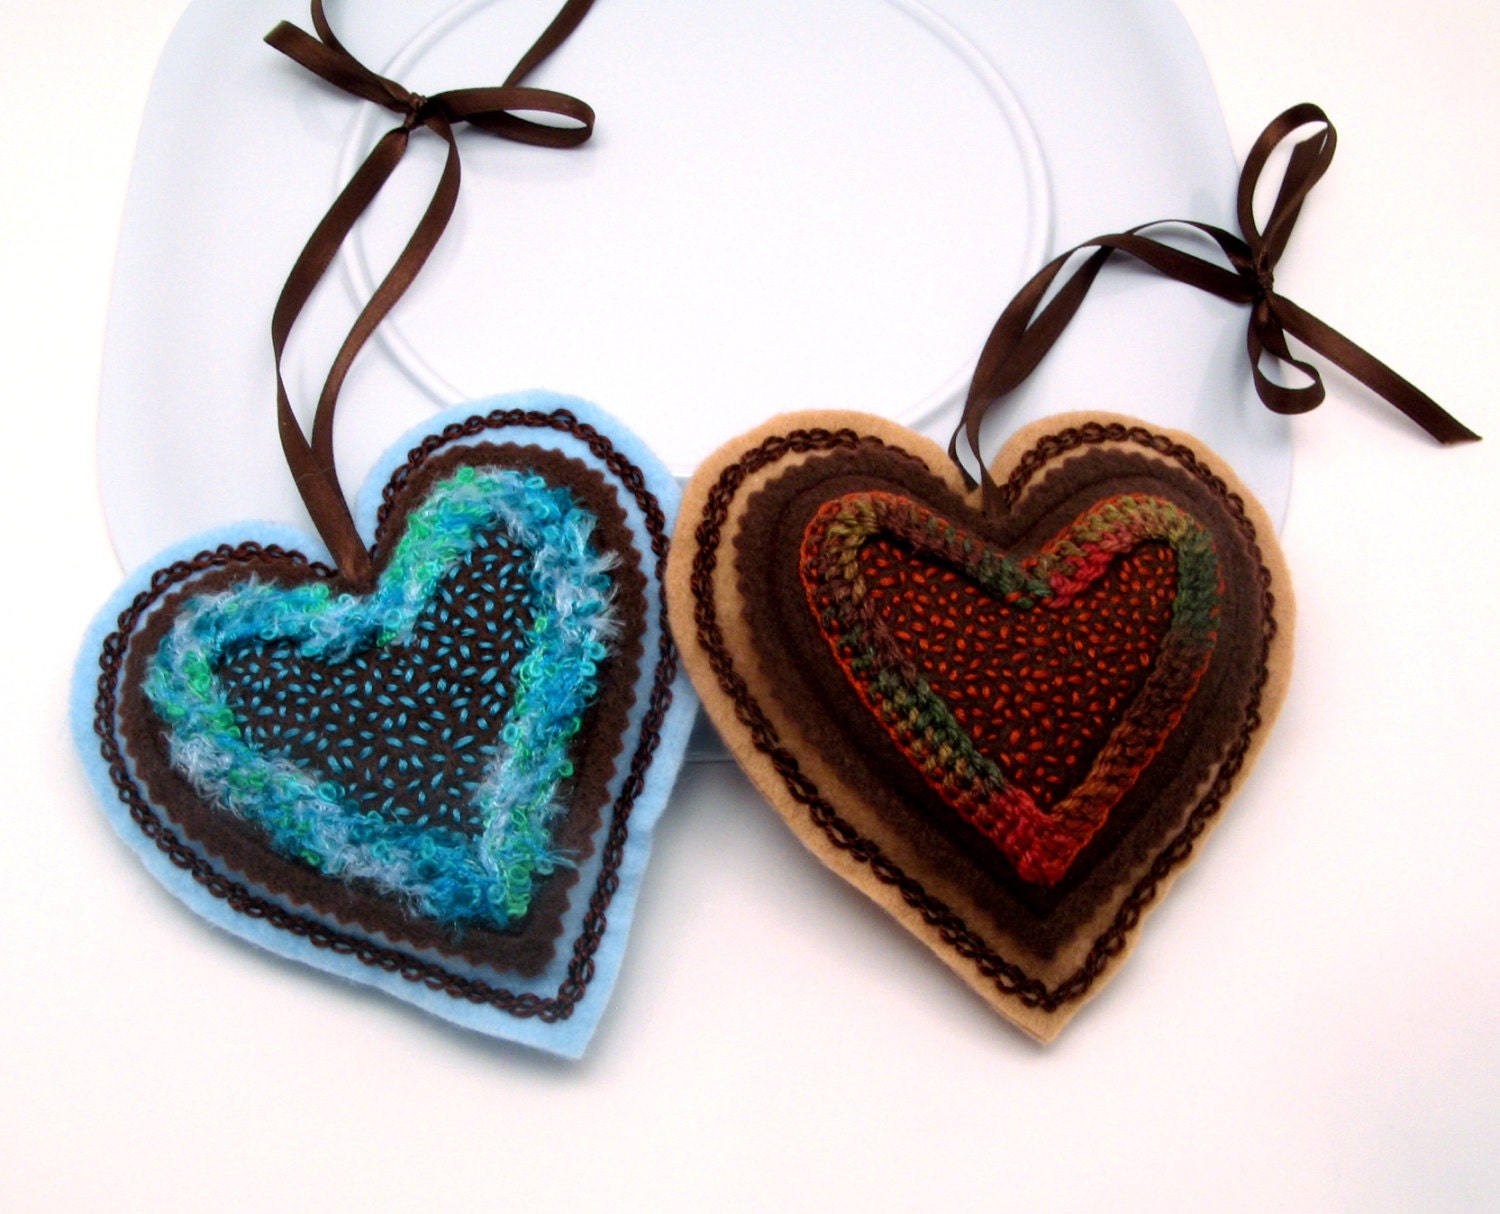 Brown and Blue Heart Ornaments, Home Decor, Felt and Embroidery Decoration, Set of Two - LaurelSusanStudio